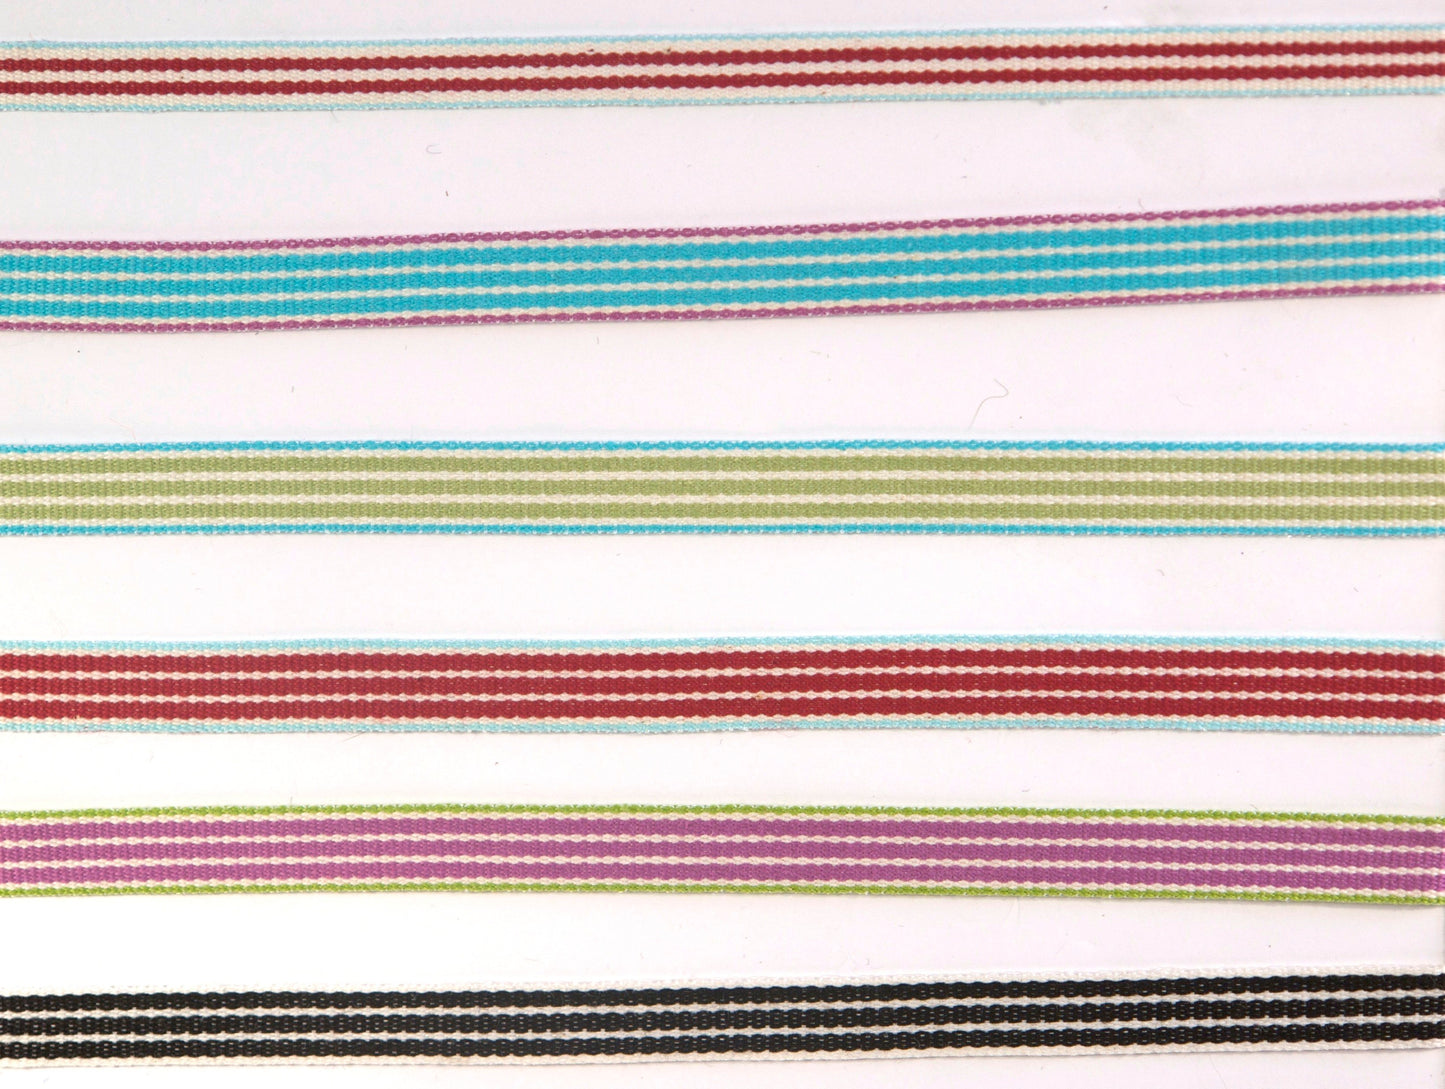 Striped band 7-10 mm